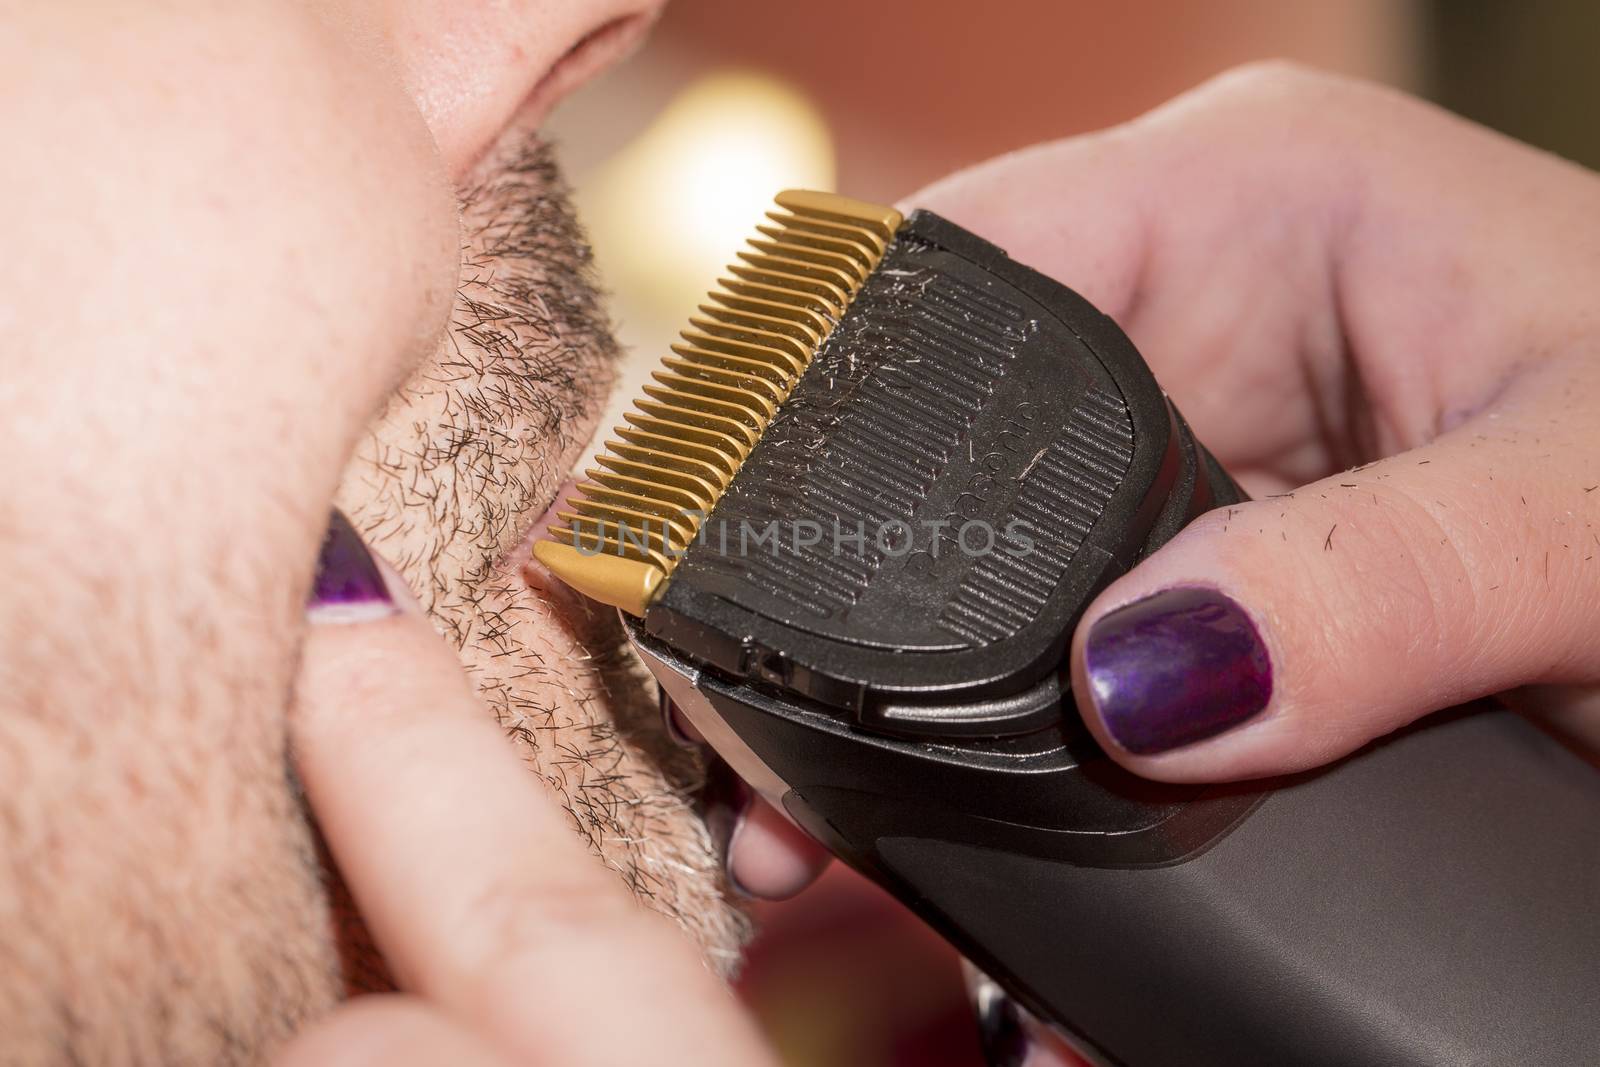 Hairdresser, cutting beard in her work place by CatherineL-Prod